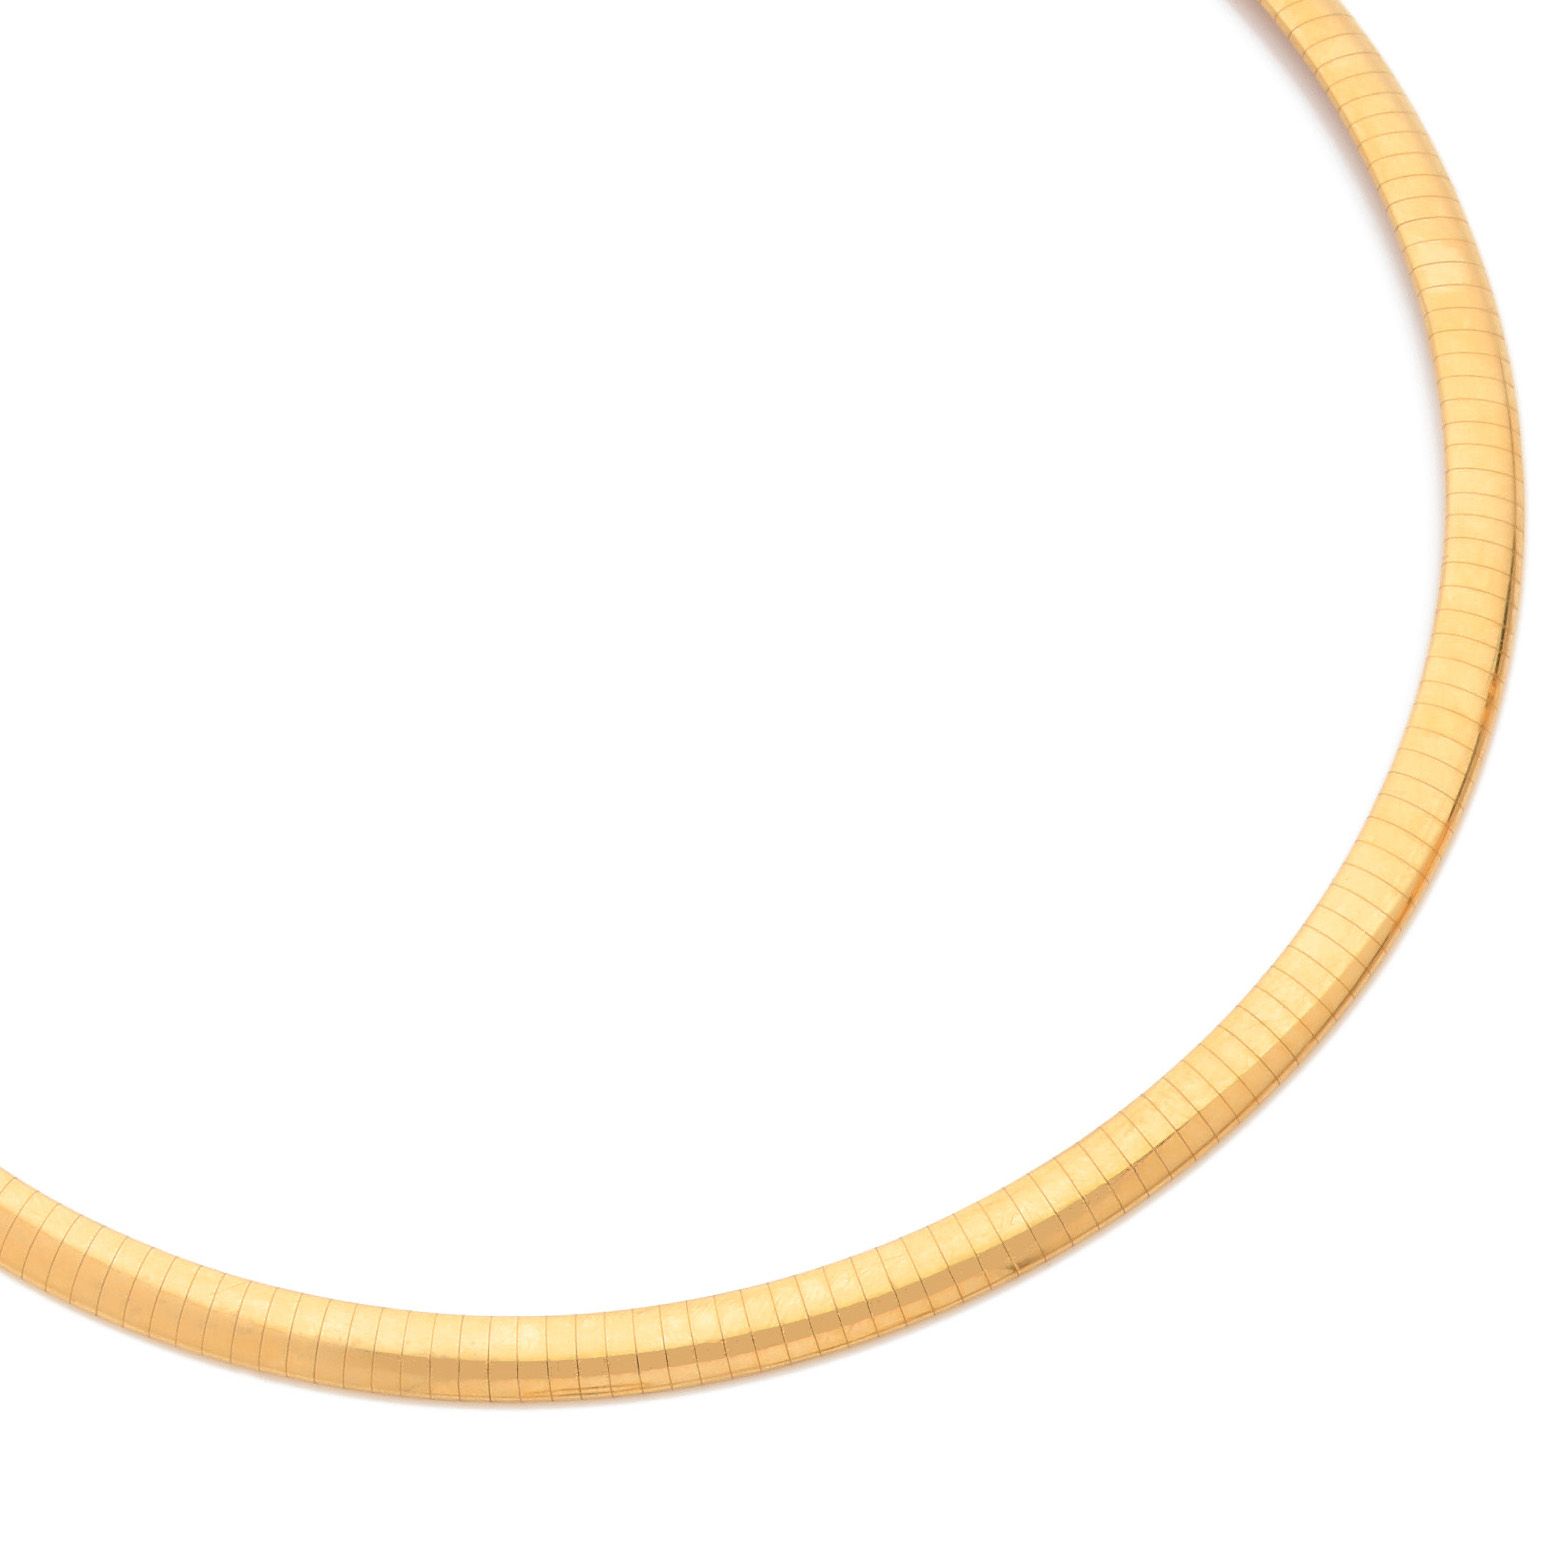 Null NECKLACE in yellow gold 750 mils. Weight 43,87 g